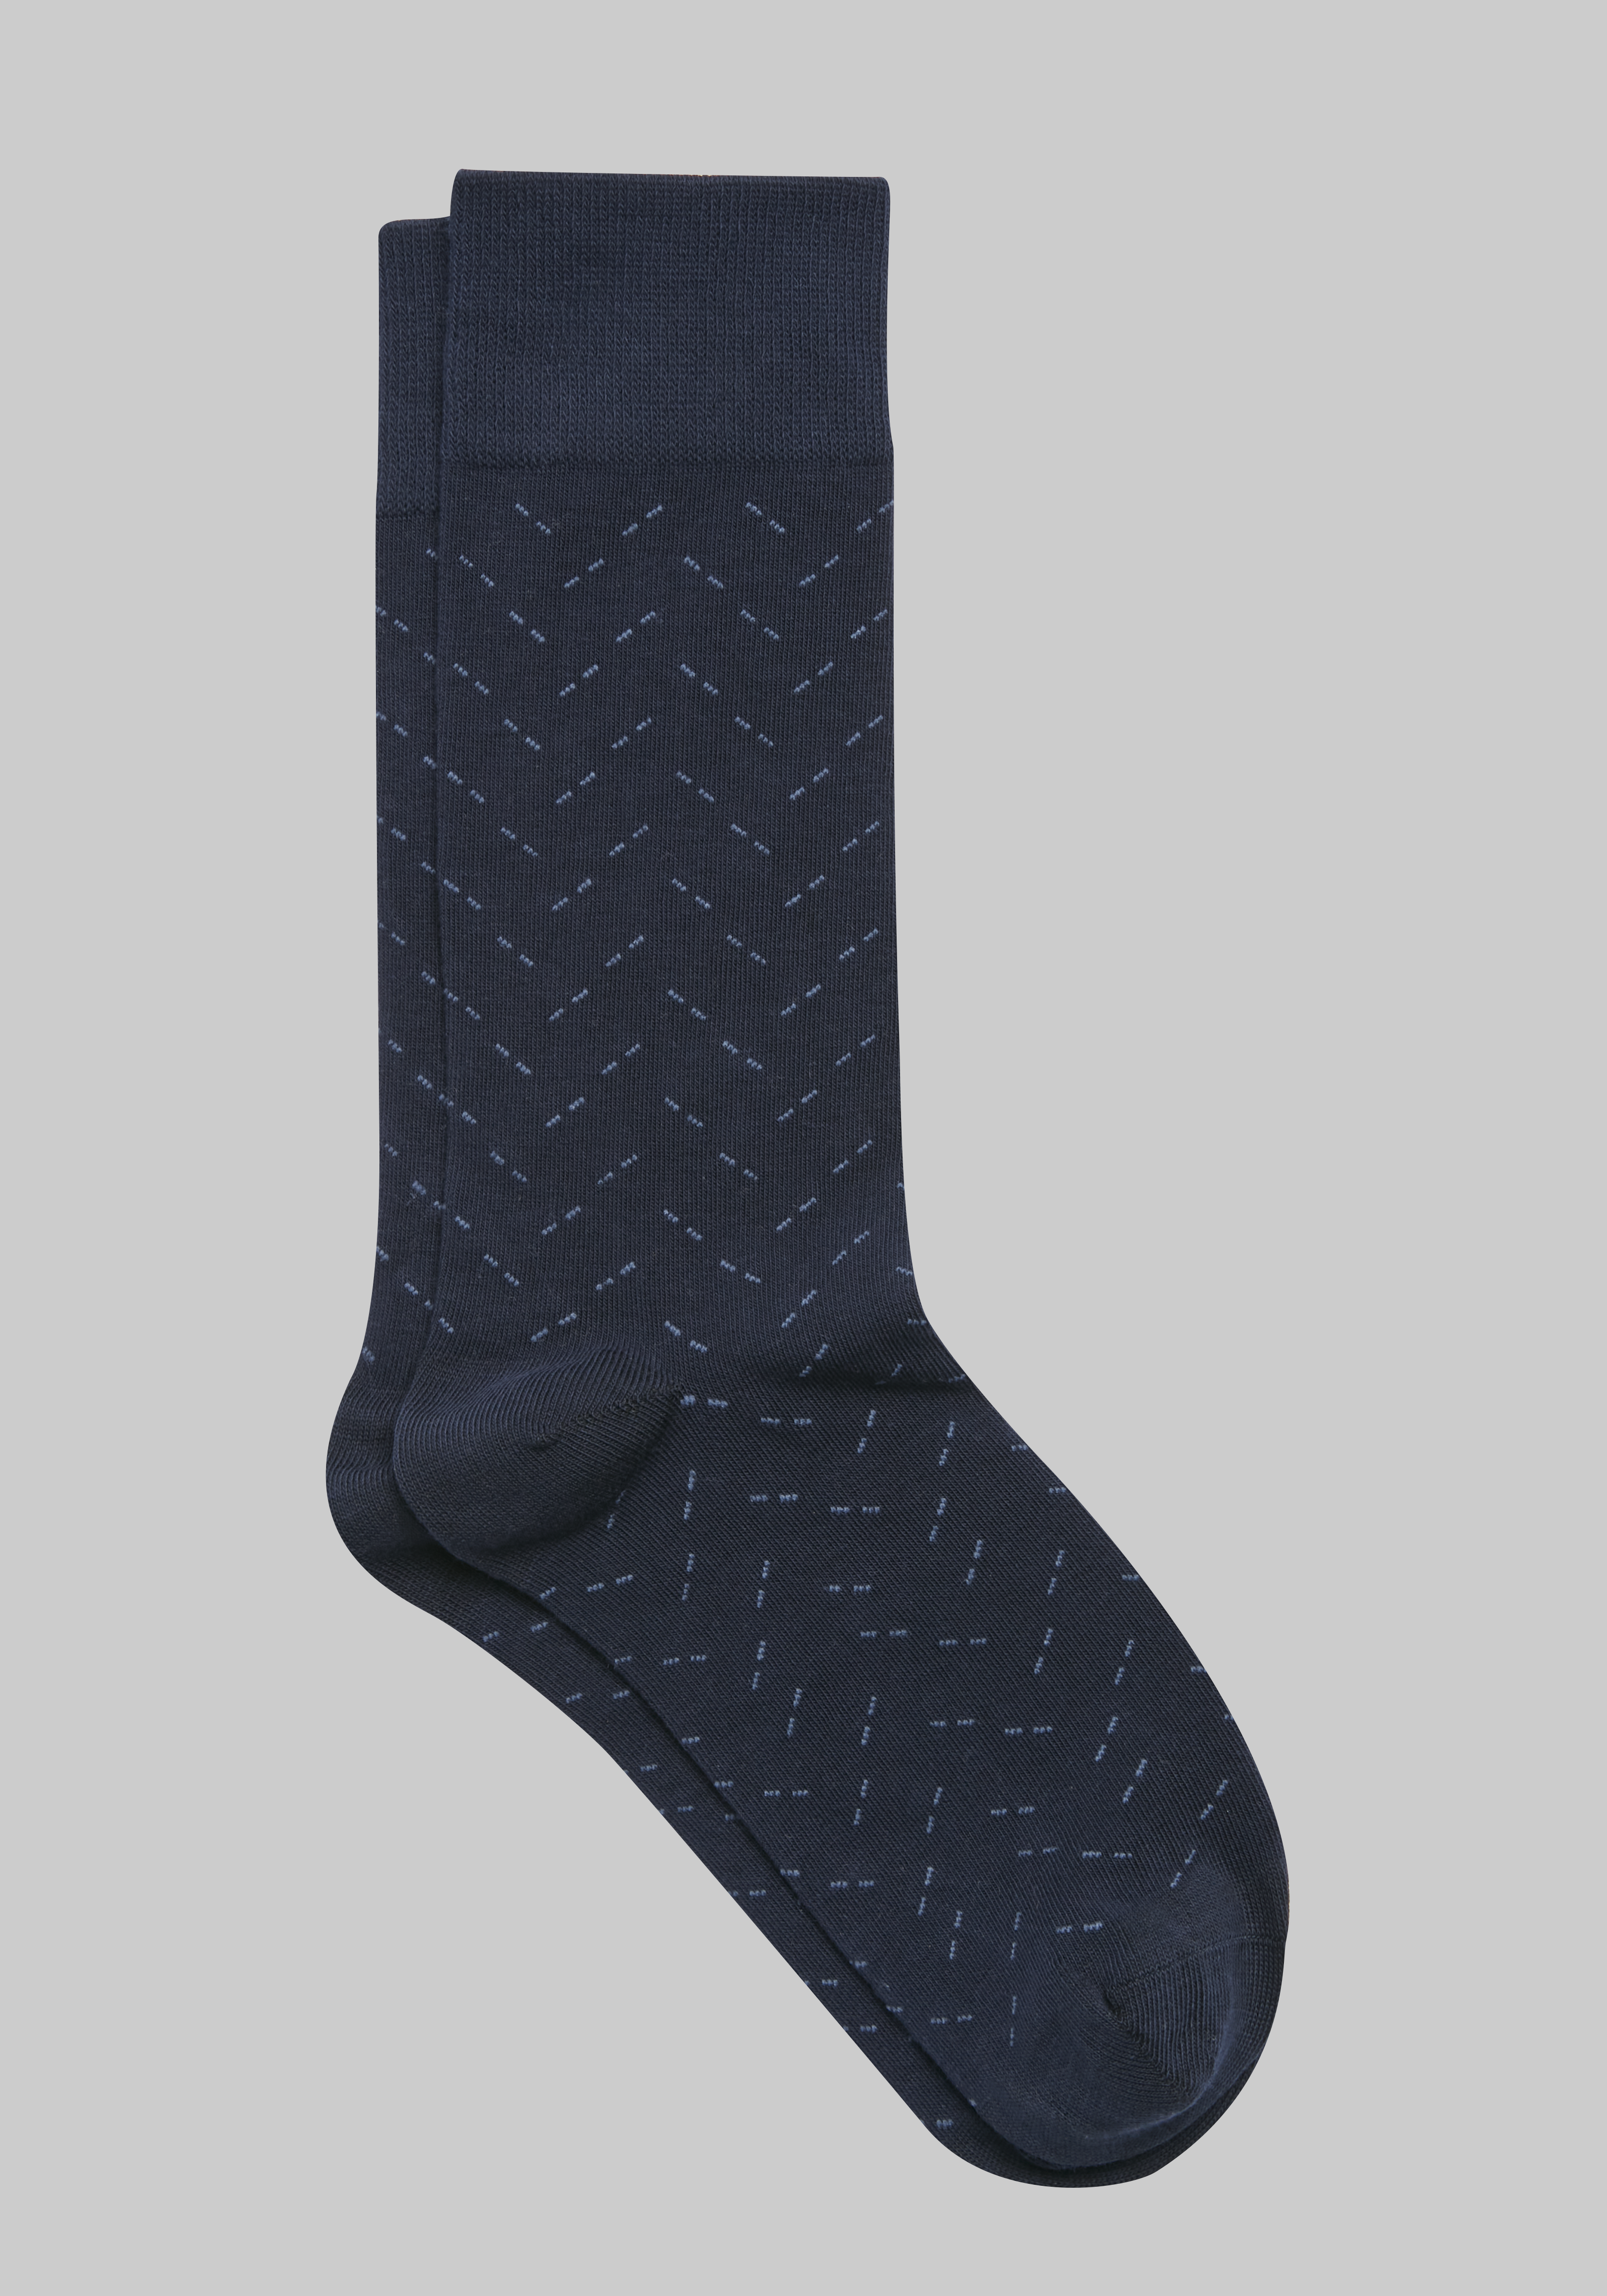 Socks With Logo LV At Front White/Black And Orange/Grey/Black And